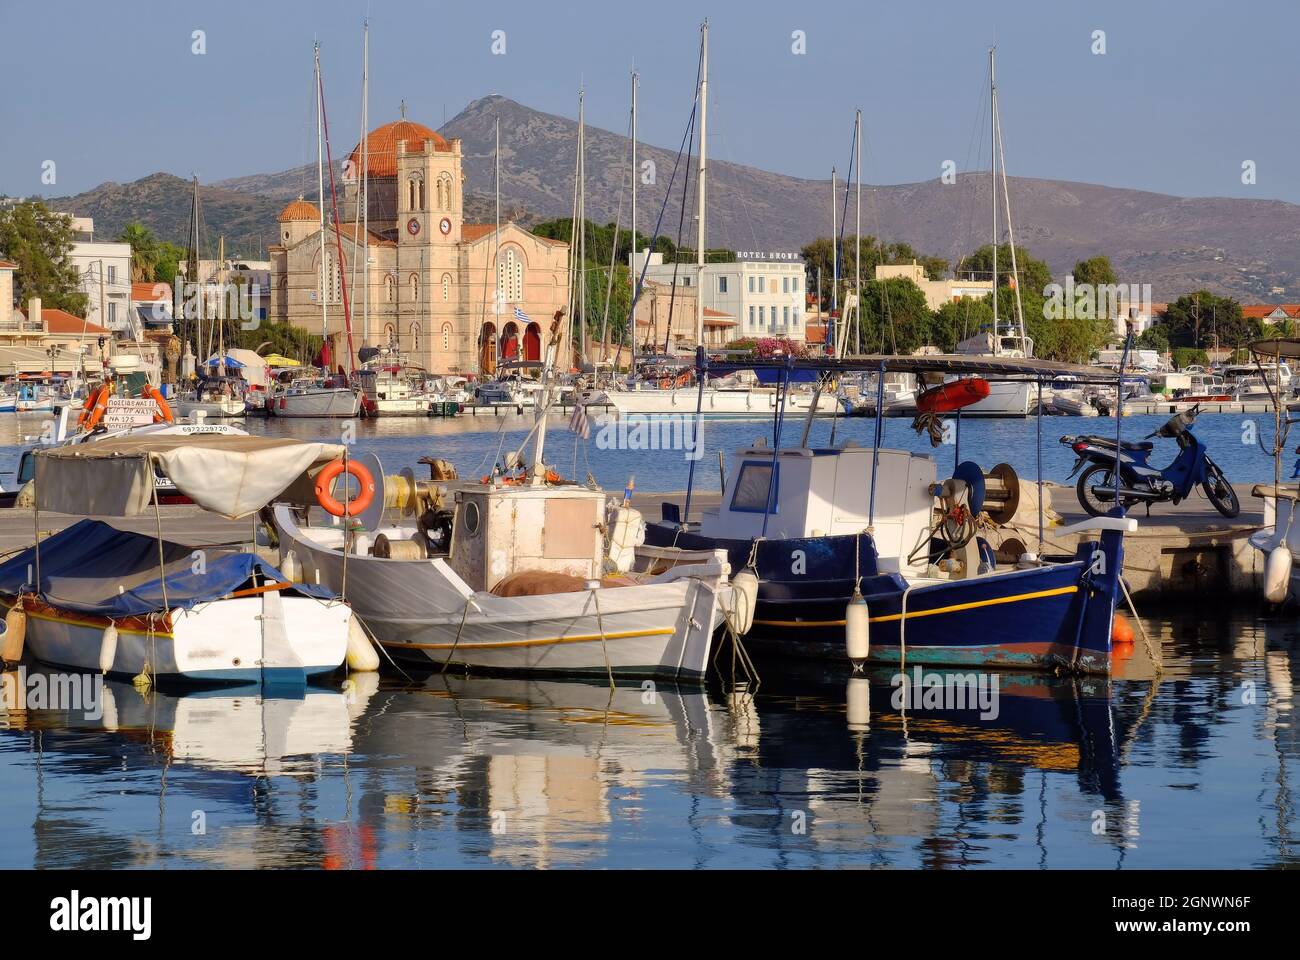 Church Isodia Theotokou, hills, fishing boats and reflections in the port soon before sunset at Aegina town, Egina Island, Greece Stock Photo